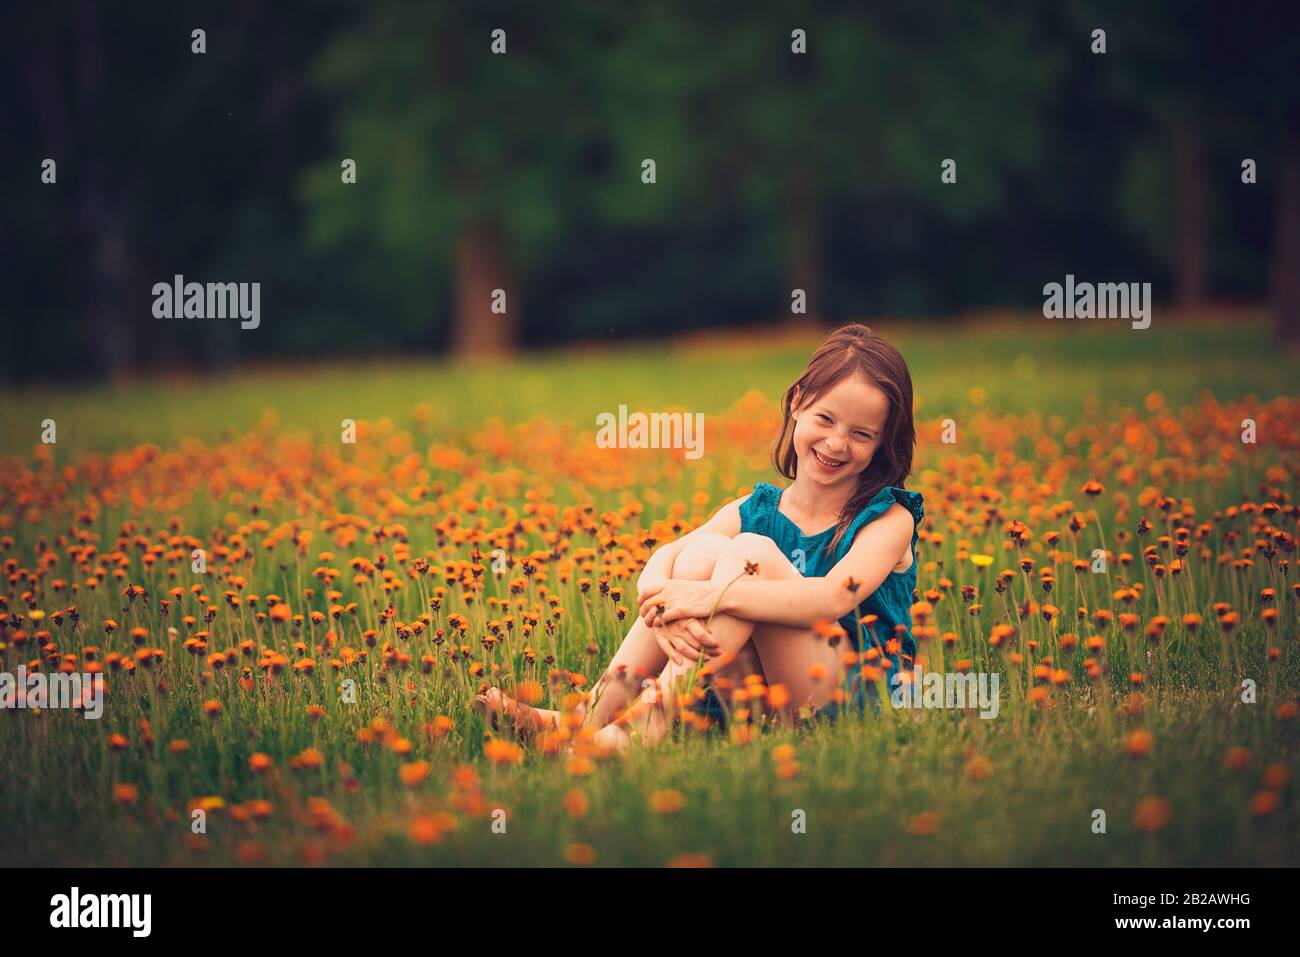 Happy girl sitting in a meadow with wildflowers laughing, USA Stock Photo